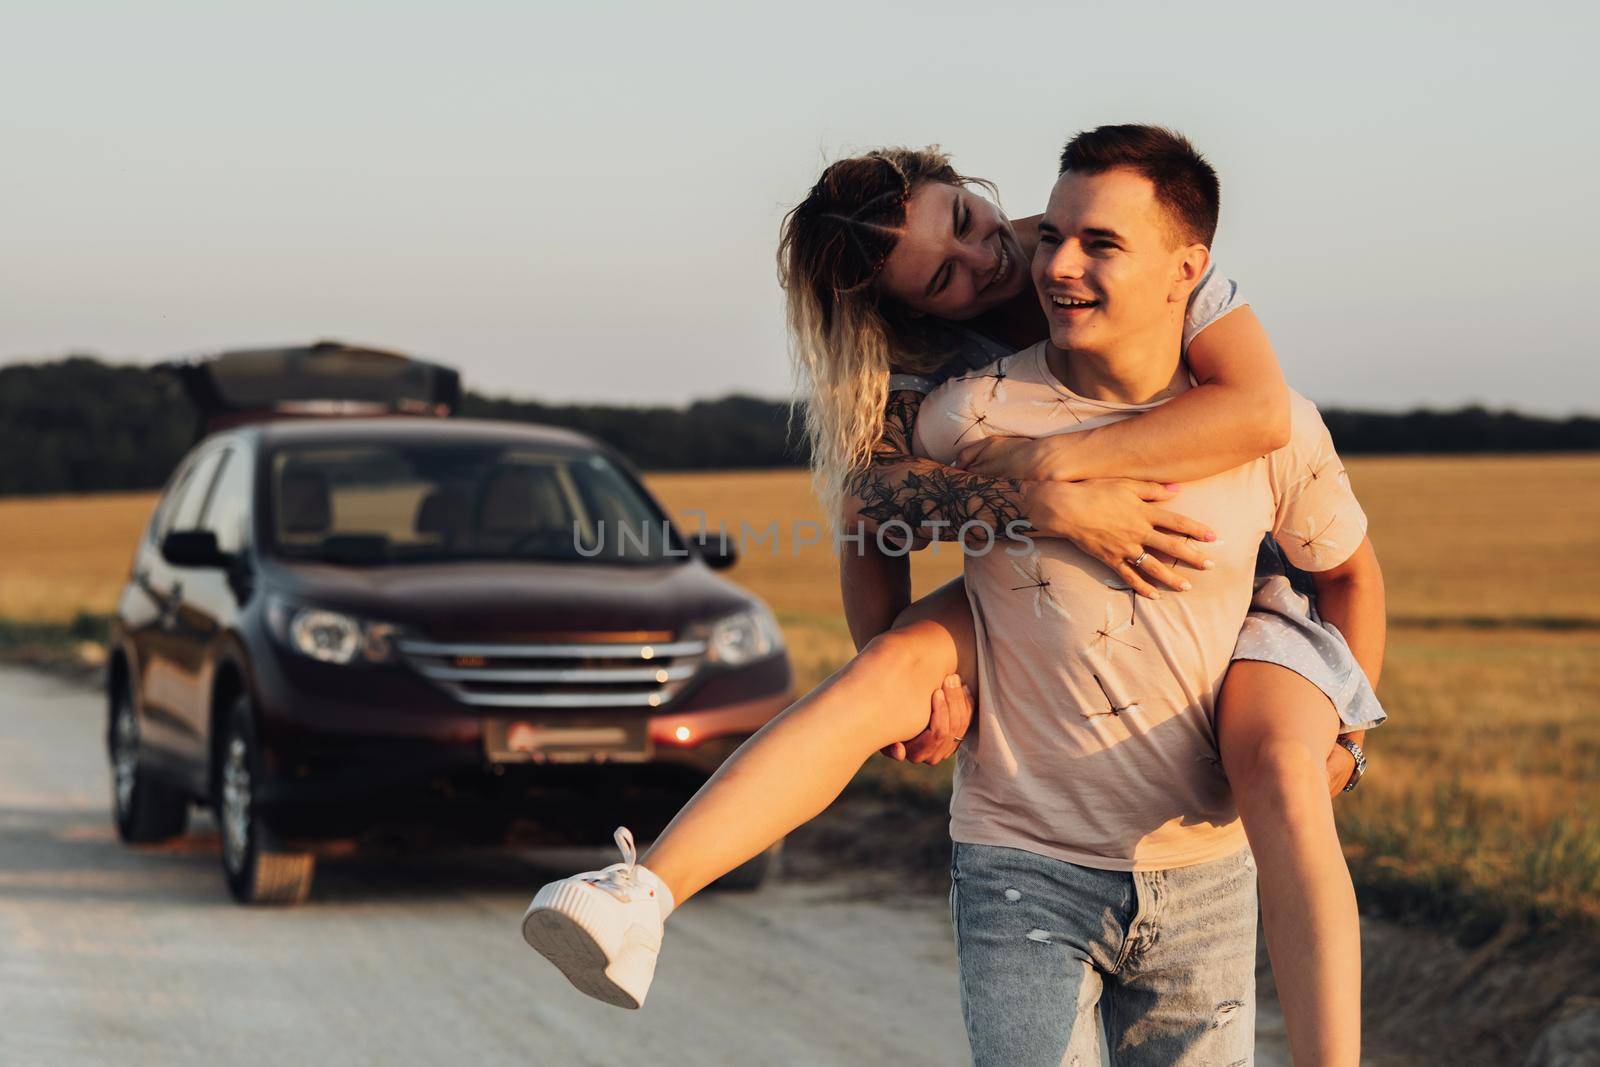 Caucasian Man Carries Girlfriend on His Back on the Background of Their SUV Car, Young Couple Enjoying Their Road Trip at Sunset by Romvy